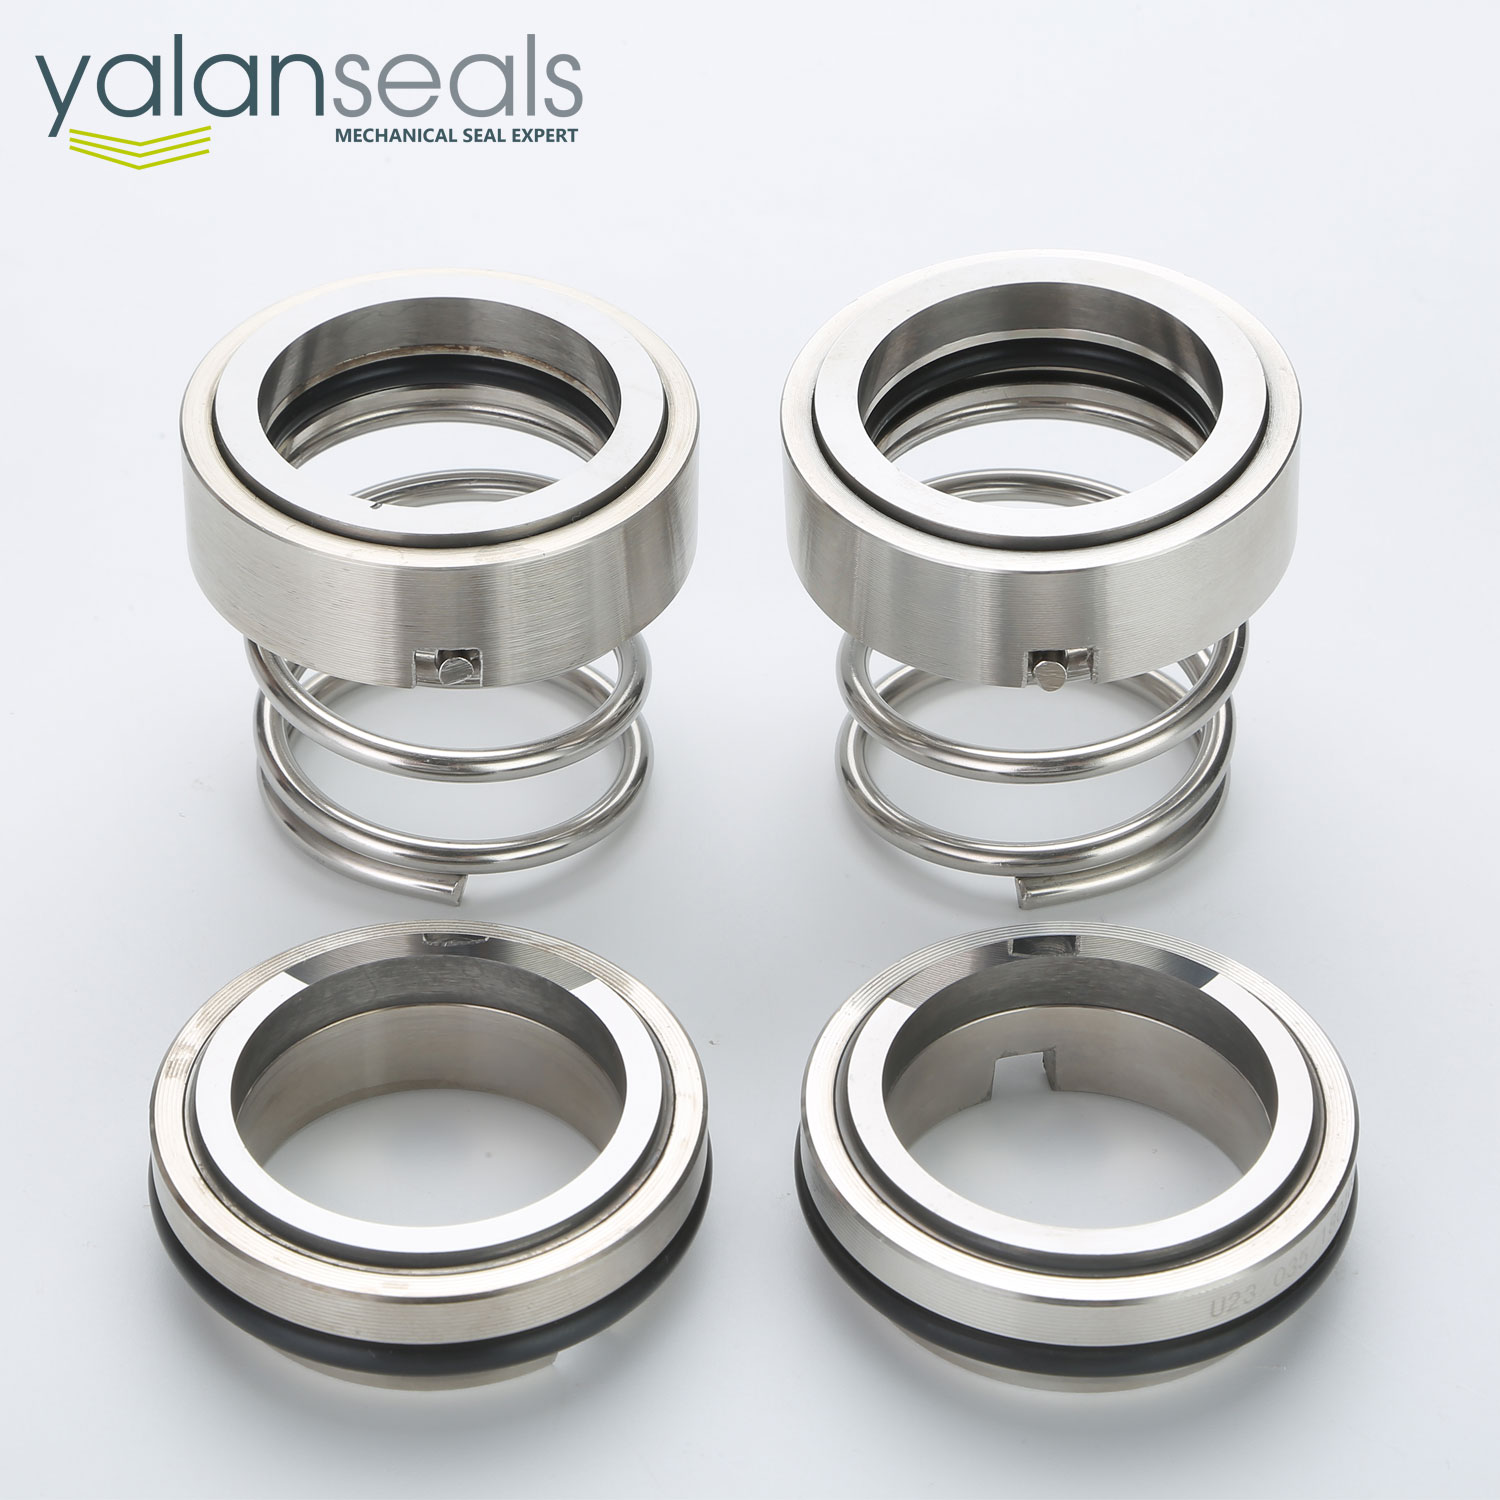 YALAN NDM Double Seals (2 NK) for Clean Water Pumps, Circulating Pumps and Vacuum Pumps